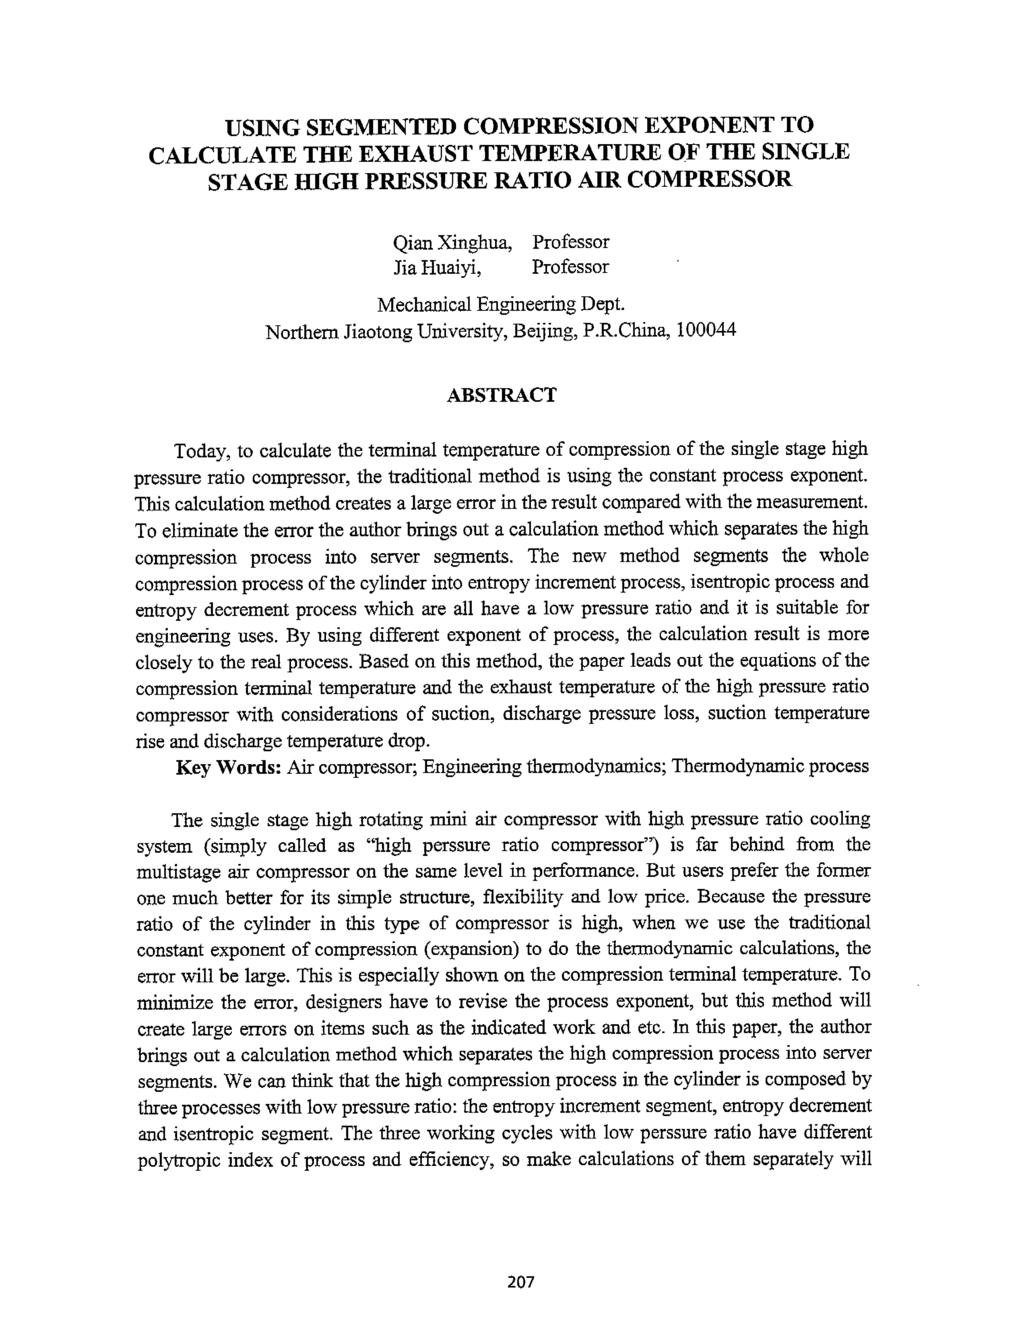 USING SEGMENTED COMPRESSION EXPONENT TO CALCULATE THE EXHAUST TEMPERATURE OF THE SINGLE STAGE IDGH PRESSURE RATIO AIR COMPRESSOR Qian Xinghua, Professor Jia Huaiyi, Professor Mechanical Engineering